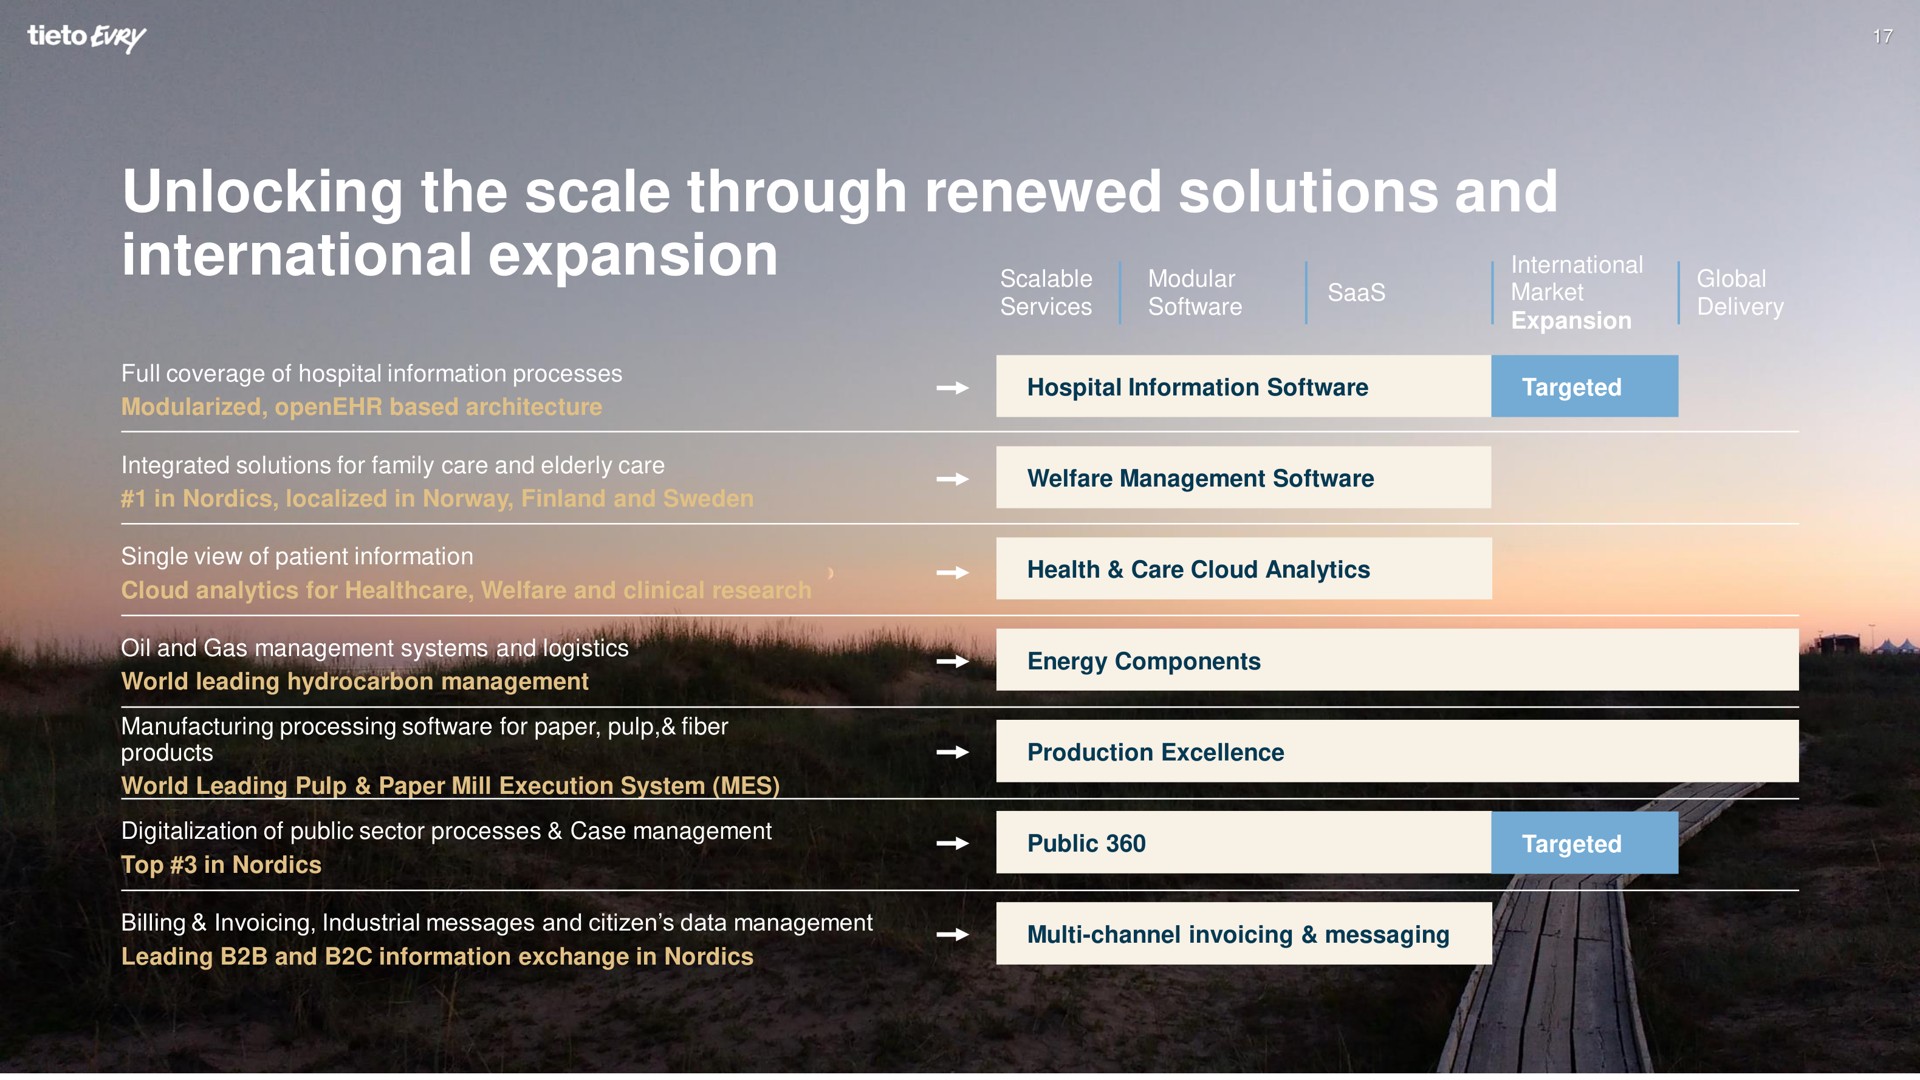 unlocking the scale through renewed solutions and international expansion | Tietoevry